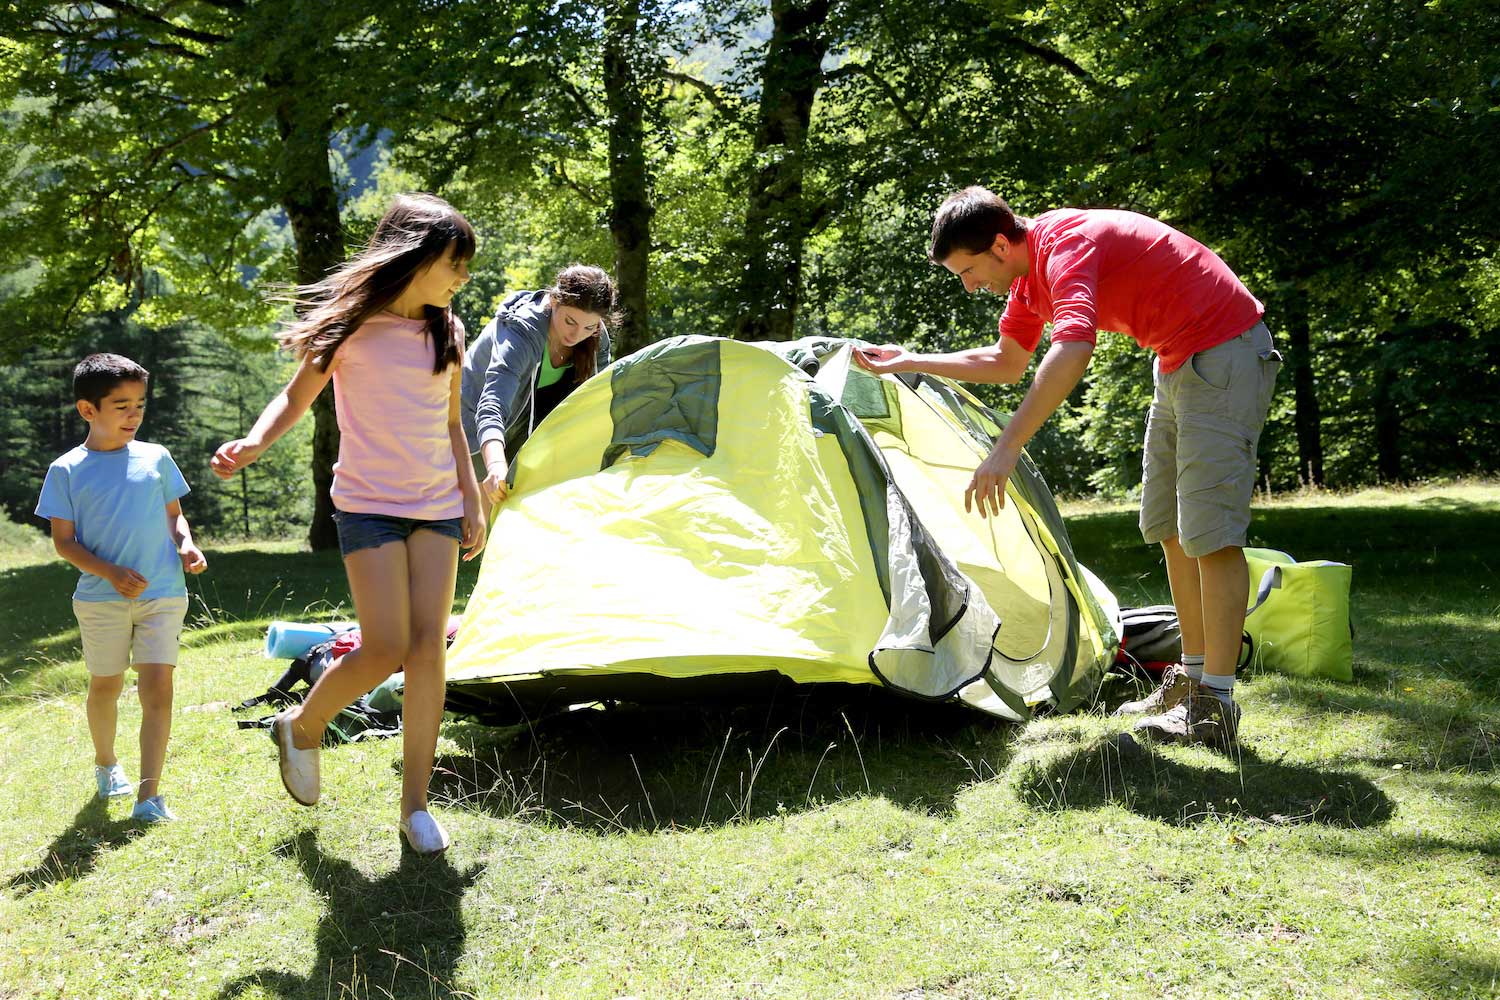 A man, a woman and two kids setting up a tent at a campsite